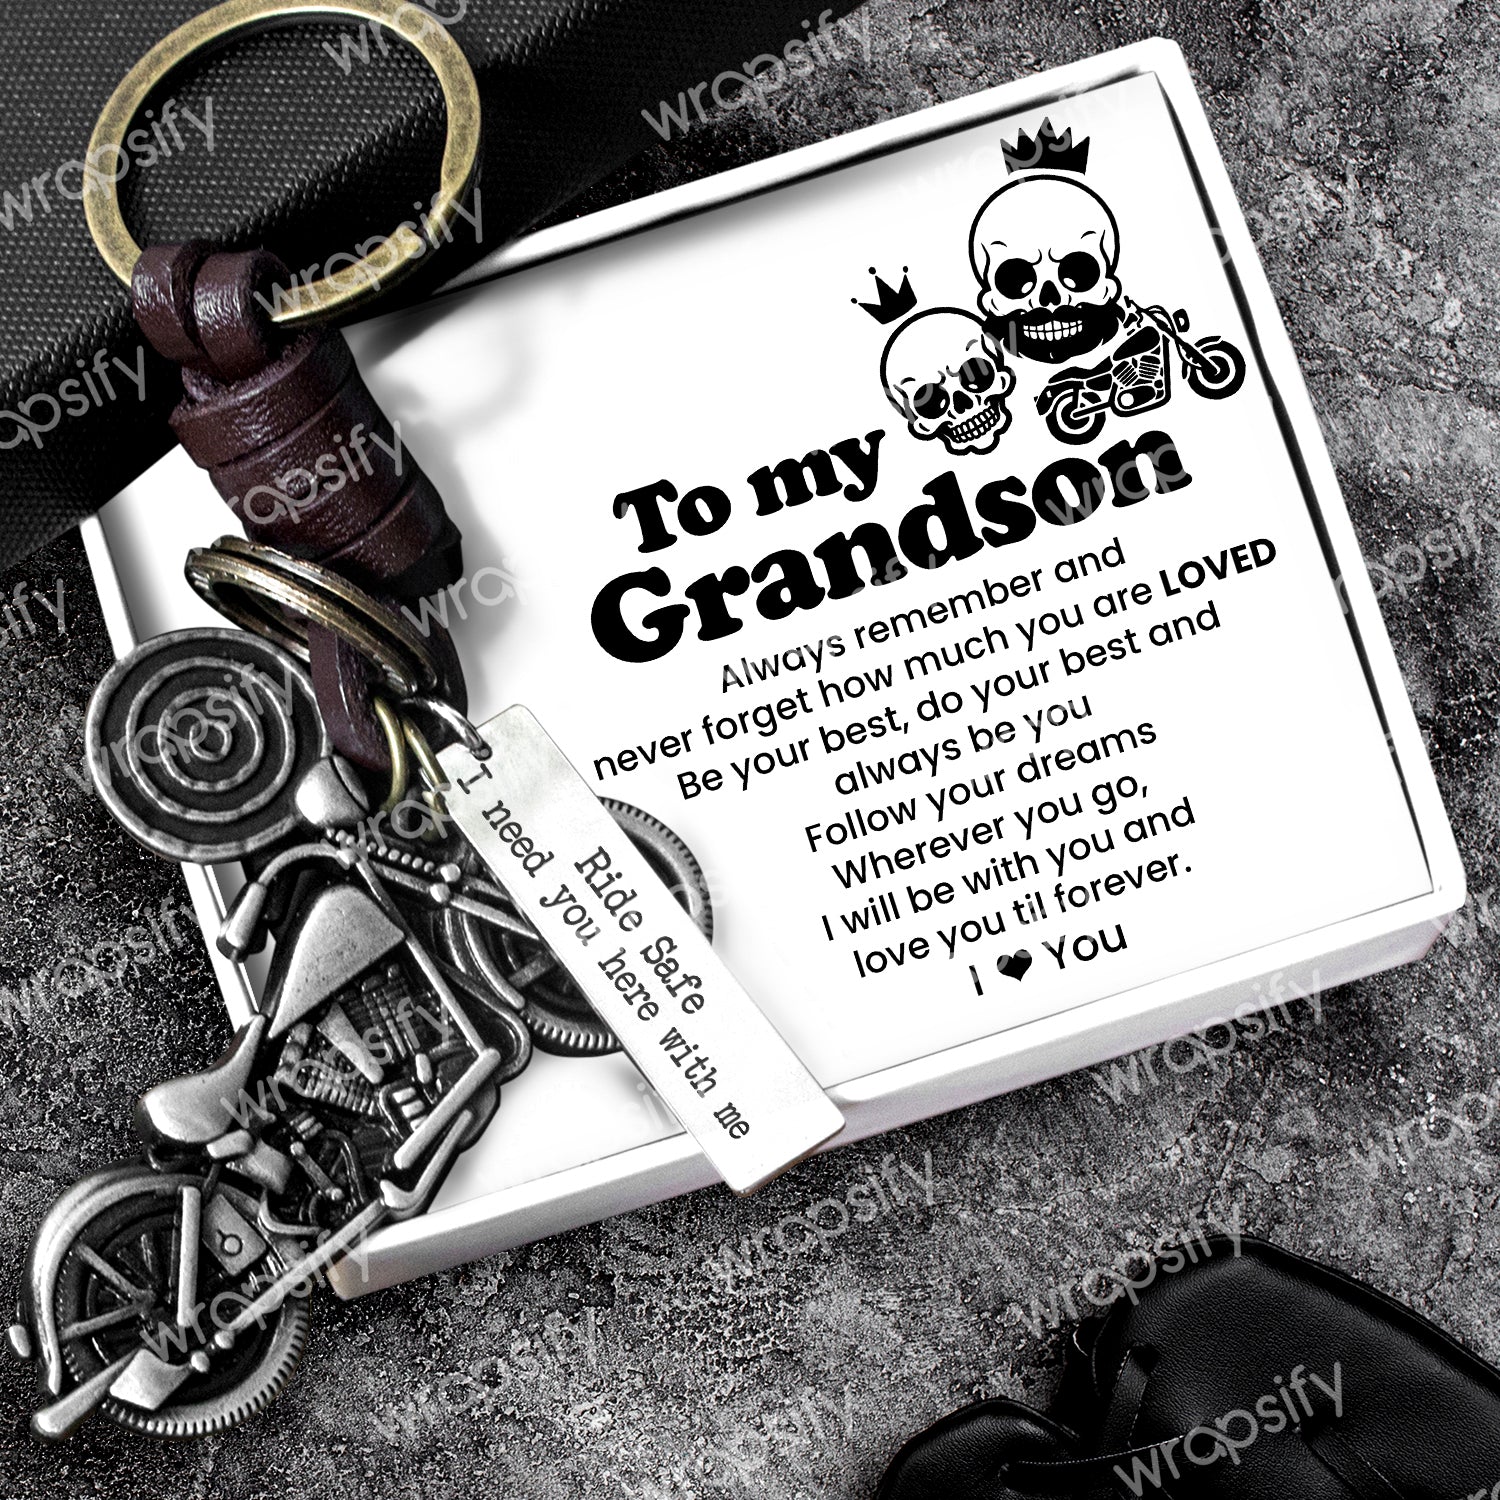 Motorcycle Keychain - Biker - To My Grandson - Ride Safe I Need You Here With Me - Gkx22003